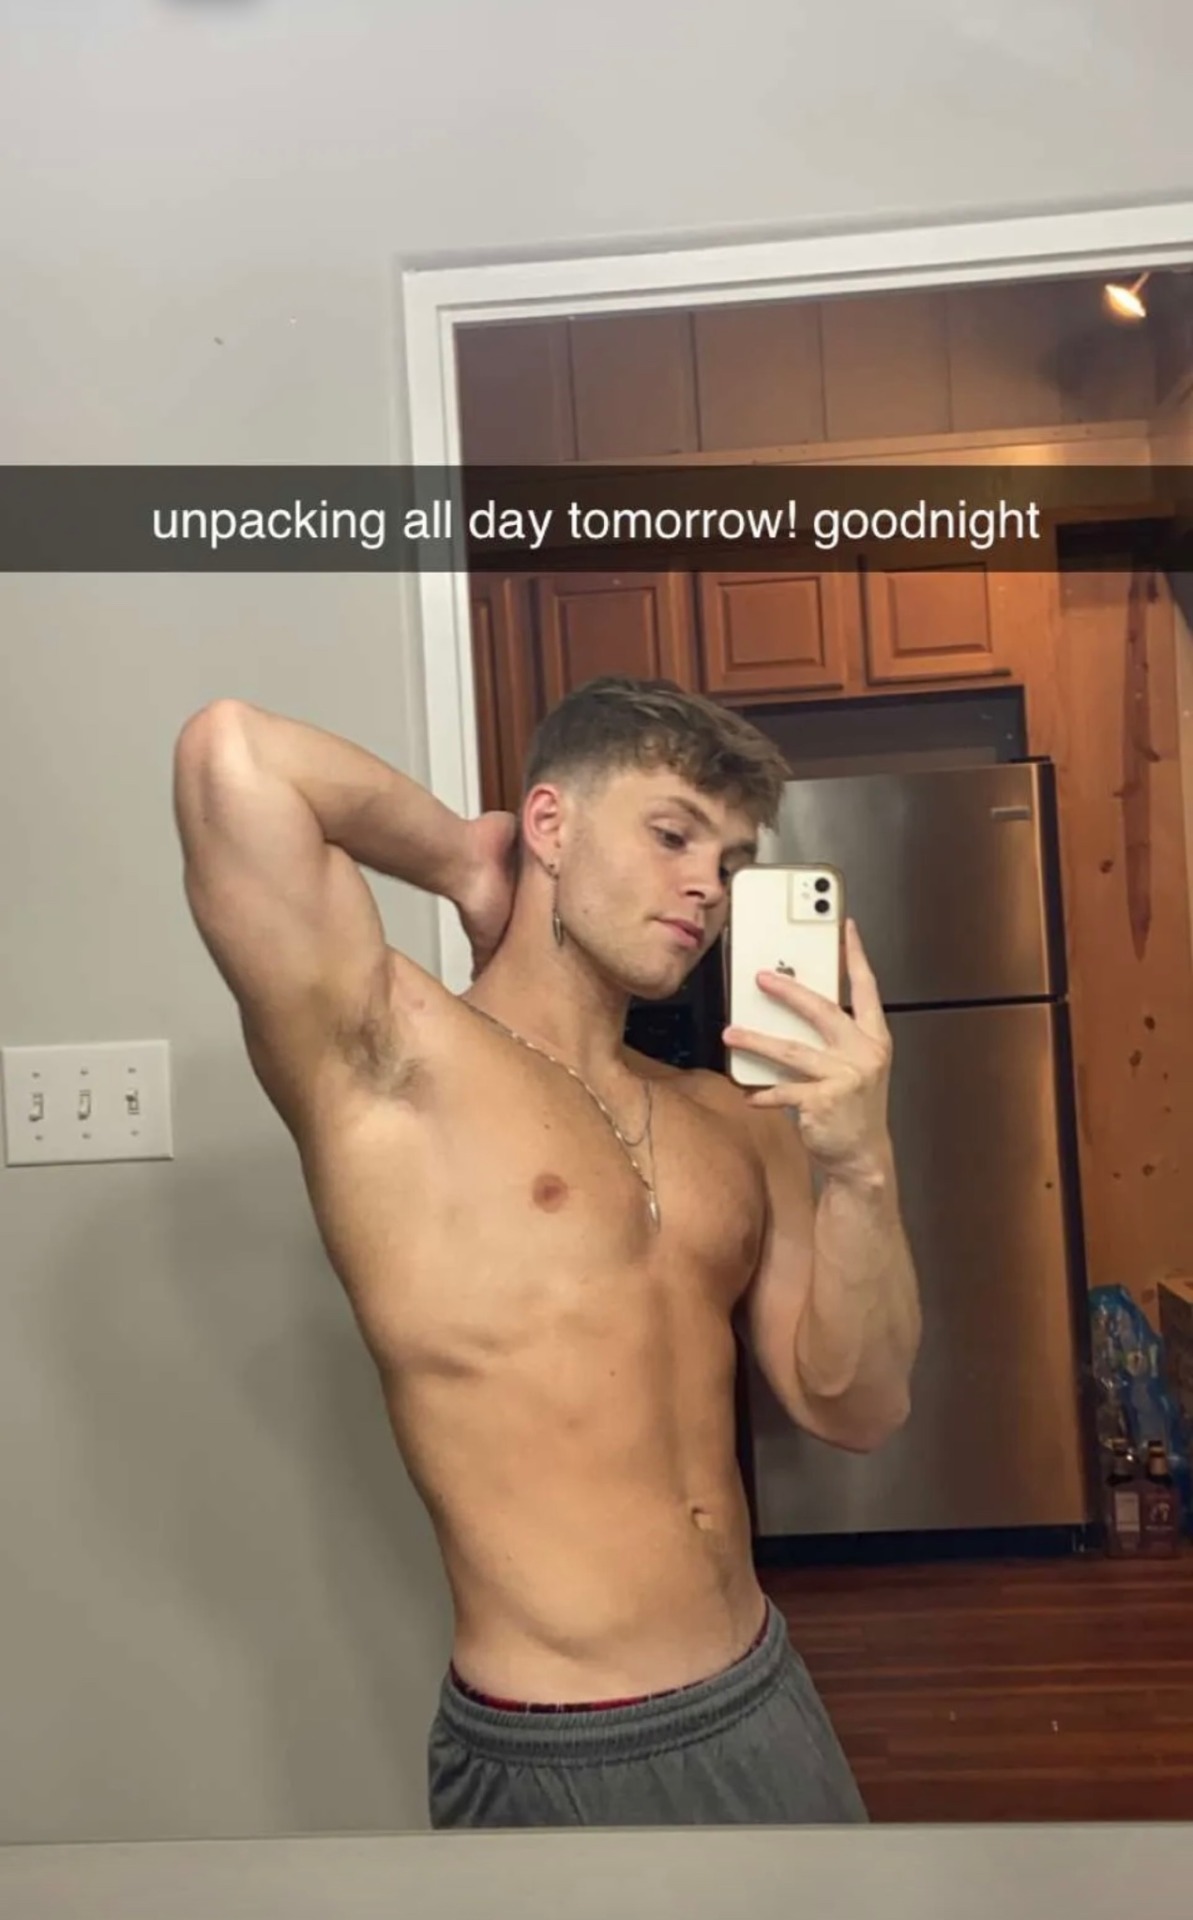 Pat downey onlyfans